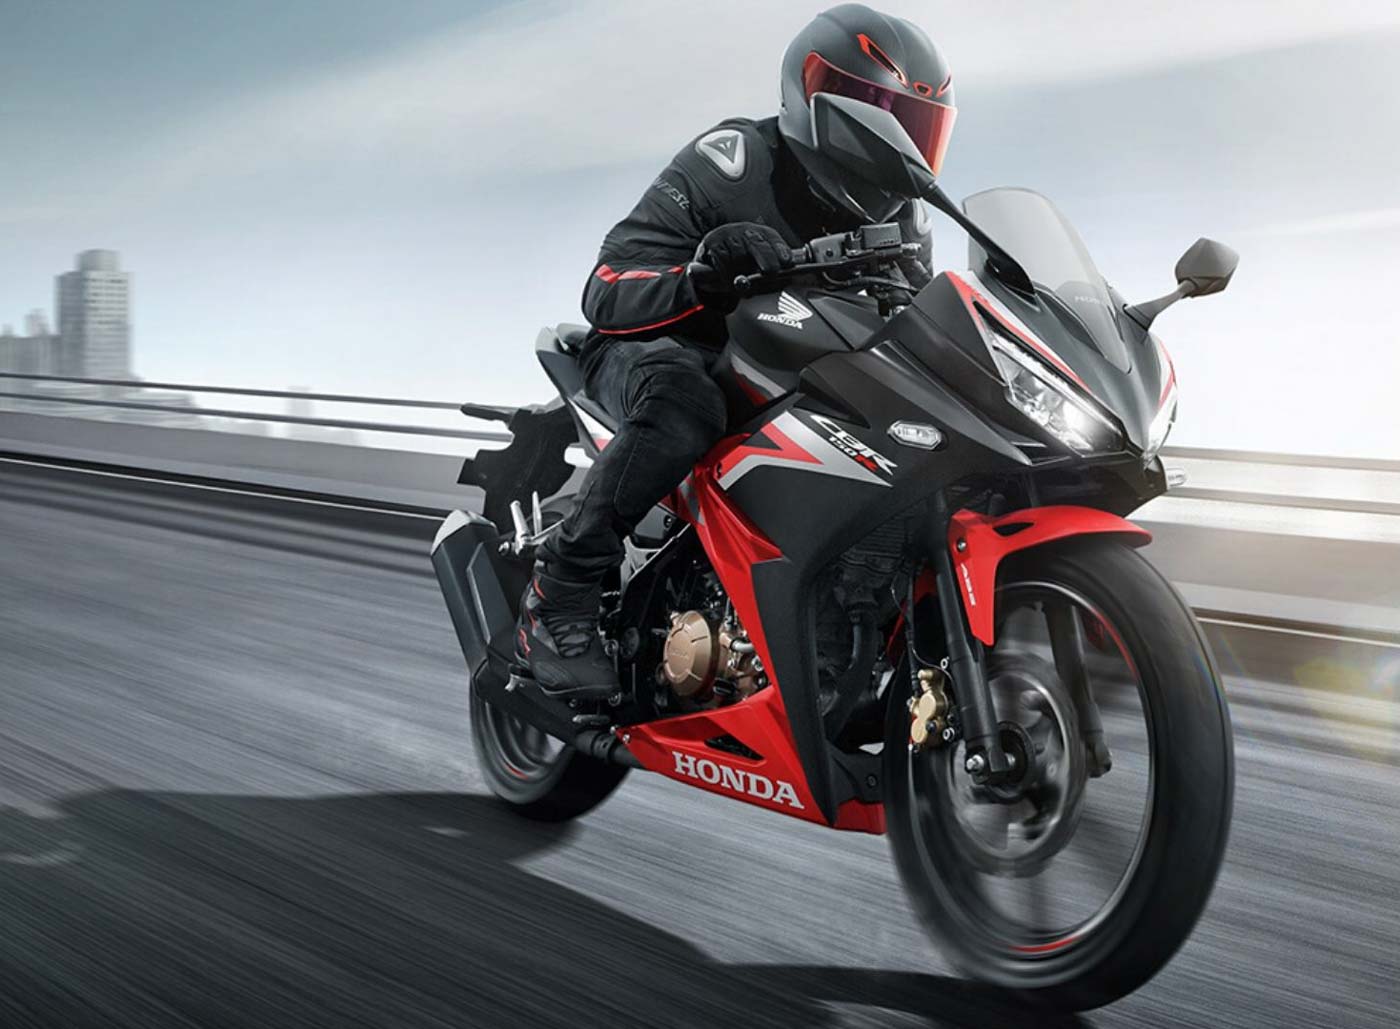 2020 Honda Cbr 150r Launched In Indonesia At Rs 1 80 Lakh